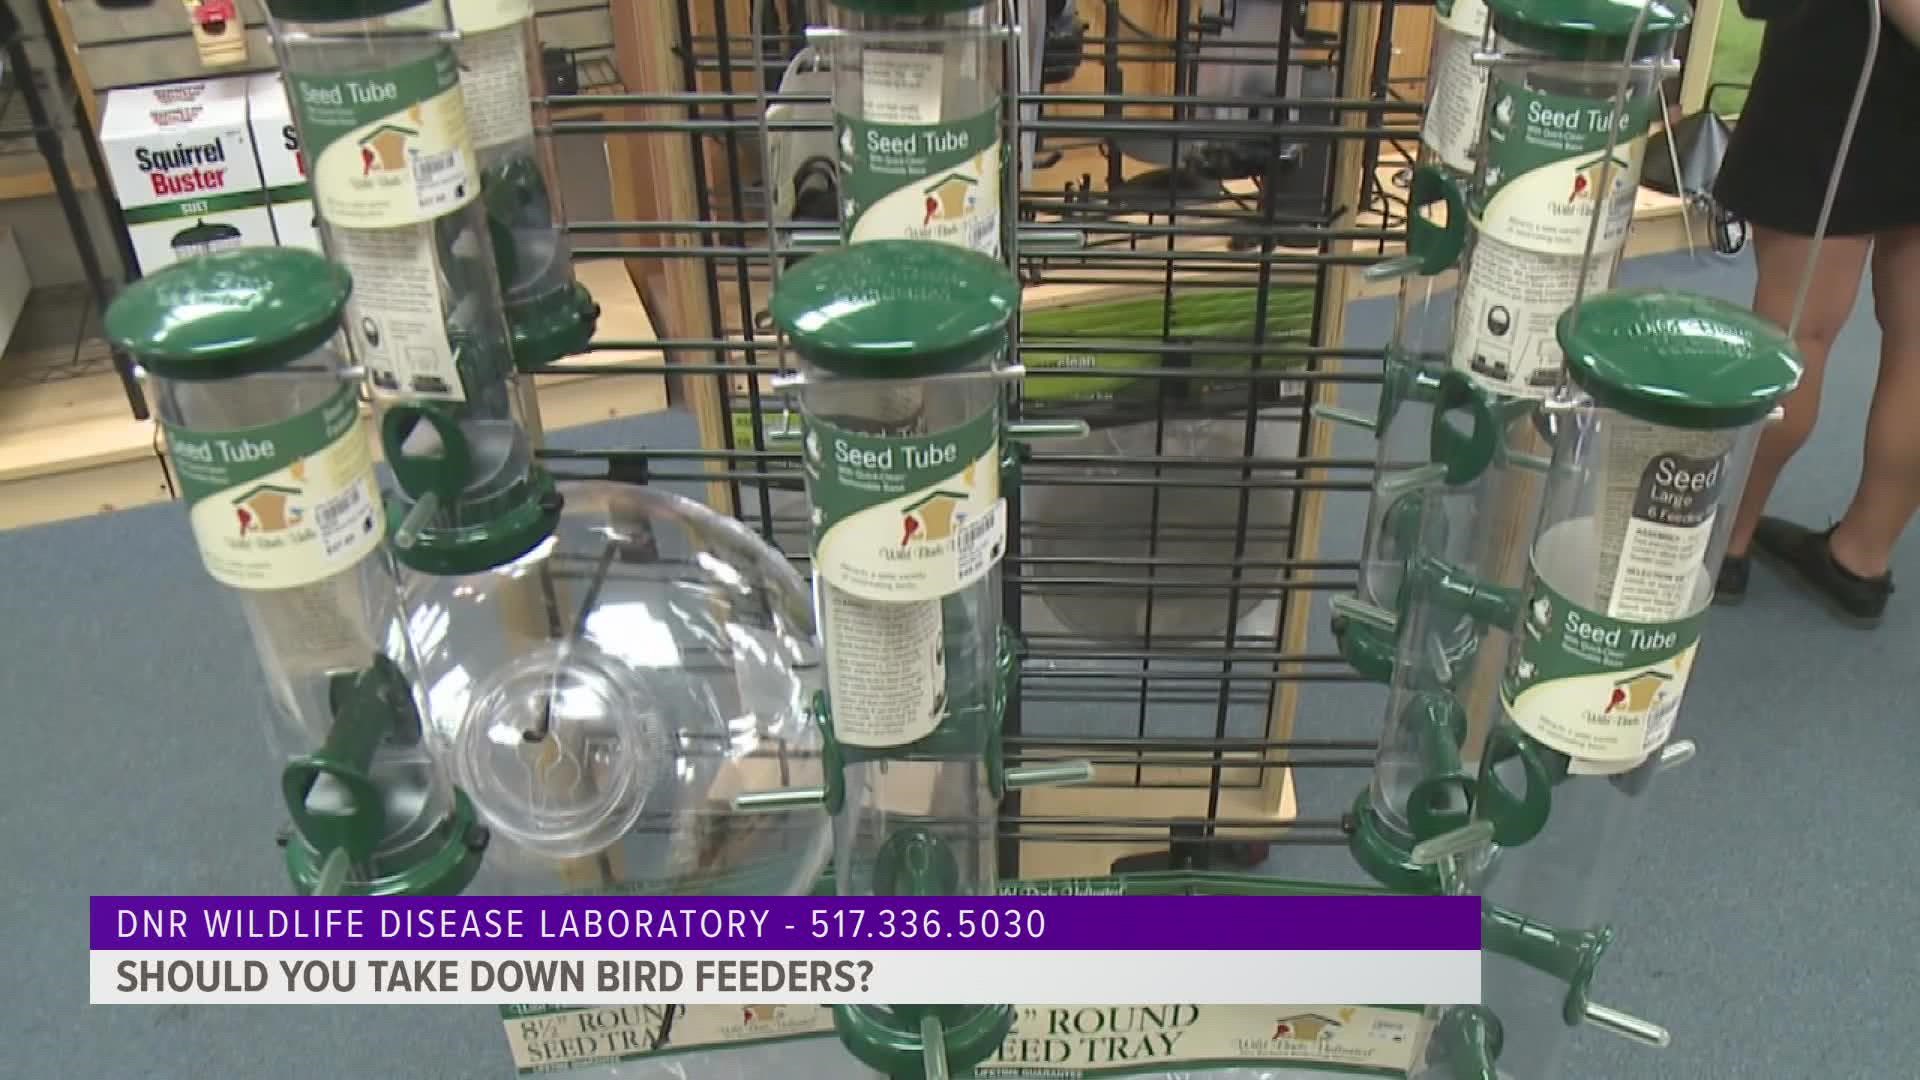 The Michigan DNR says that birds that typically visit bird feeders like cardinals and chickadees are less susceptible to the avian flu.